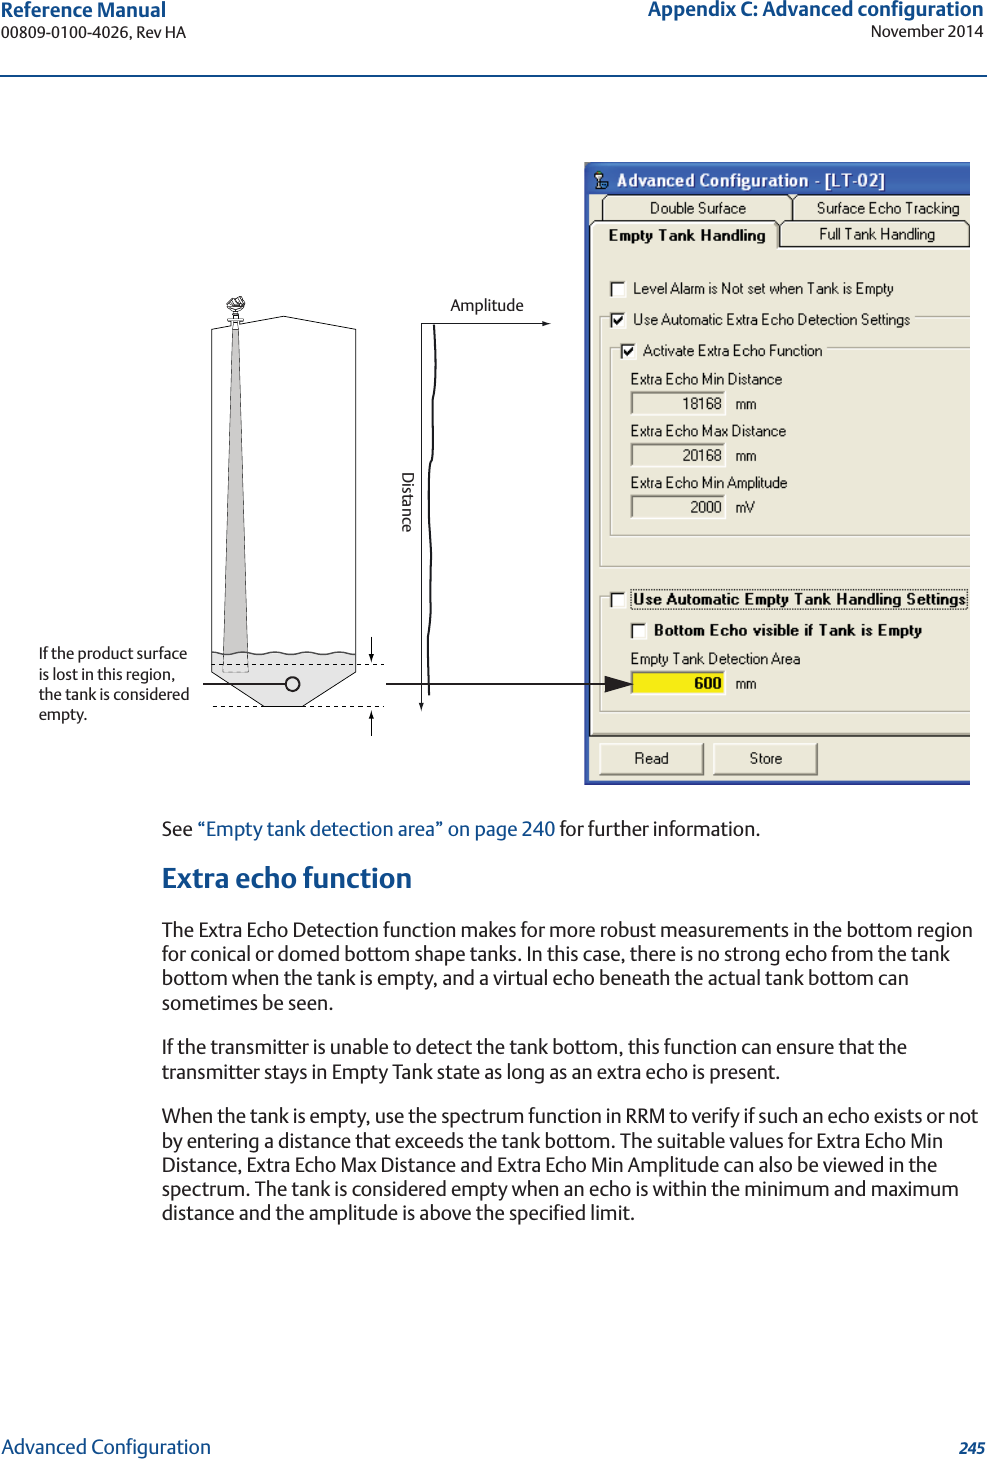 245Reference Manual 00809-0100-4026, Rev HAAppendix C: Advanced configurationNovember 2014Advanced ConfigurationSee “Empty tank detection area” on page 240 for further information.Extra echo functionThe Extra Echo Detection function makes for more robust measurements in the bottom region for conical or domed bottom shape tanks. In this case, there is no strong echo from the tank bottom when the tank is empty, and a virtual echo beneath the actual tank bottom can sometimes be seen.If the transmitter is unable to detect the tank bottom, this function can ensure that the transmitter stays in Empty Tank state as long as an extra echo is present.When the tank is empty, use the spectrum function in RRM to verify if such an echo exists or not by entering a distance that exceeds the tank bottom. The suitable values for Extra Echo Min Distance, Extra Echo Max Distance and Extra Echo Min Amplitude can also be viewed in the spectrum. The tank is considered empty when an echo is within the minimum and maximum distance and the amplitude is above the specified limit.AmplitudeDistanceIf the product surface is lost in this region, the tank is considered empty.